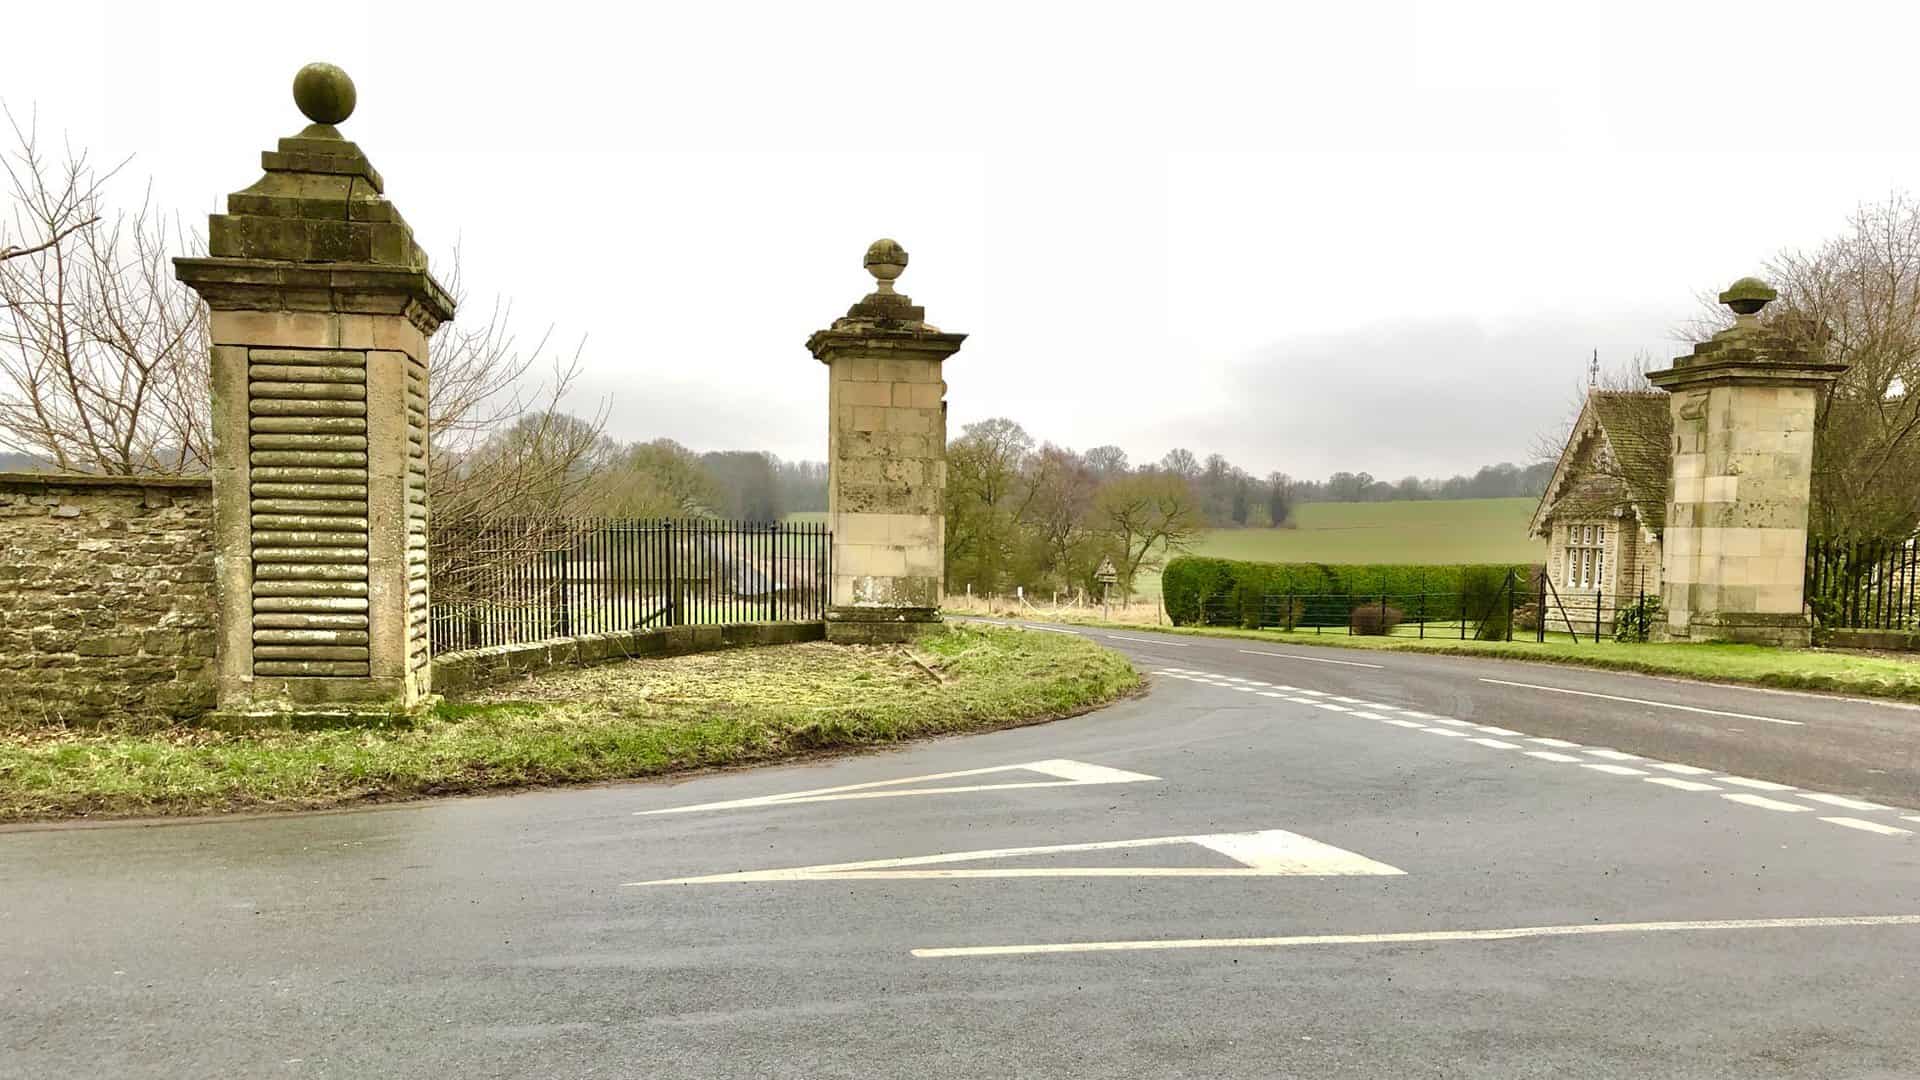 Entrance to the grounds of Castle Howard, near the start of the Coneysthorpe walk.